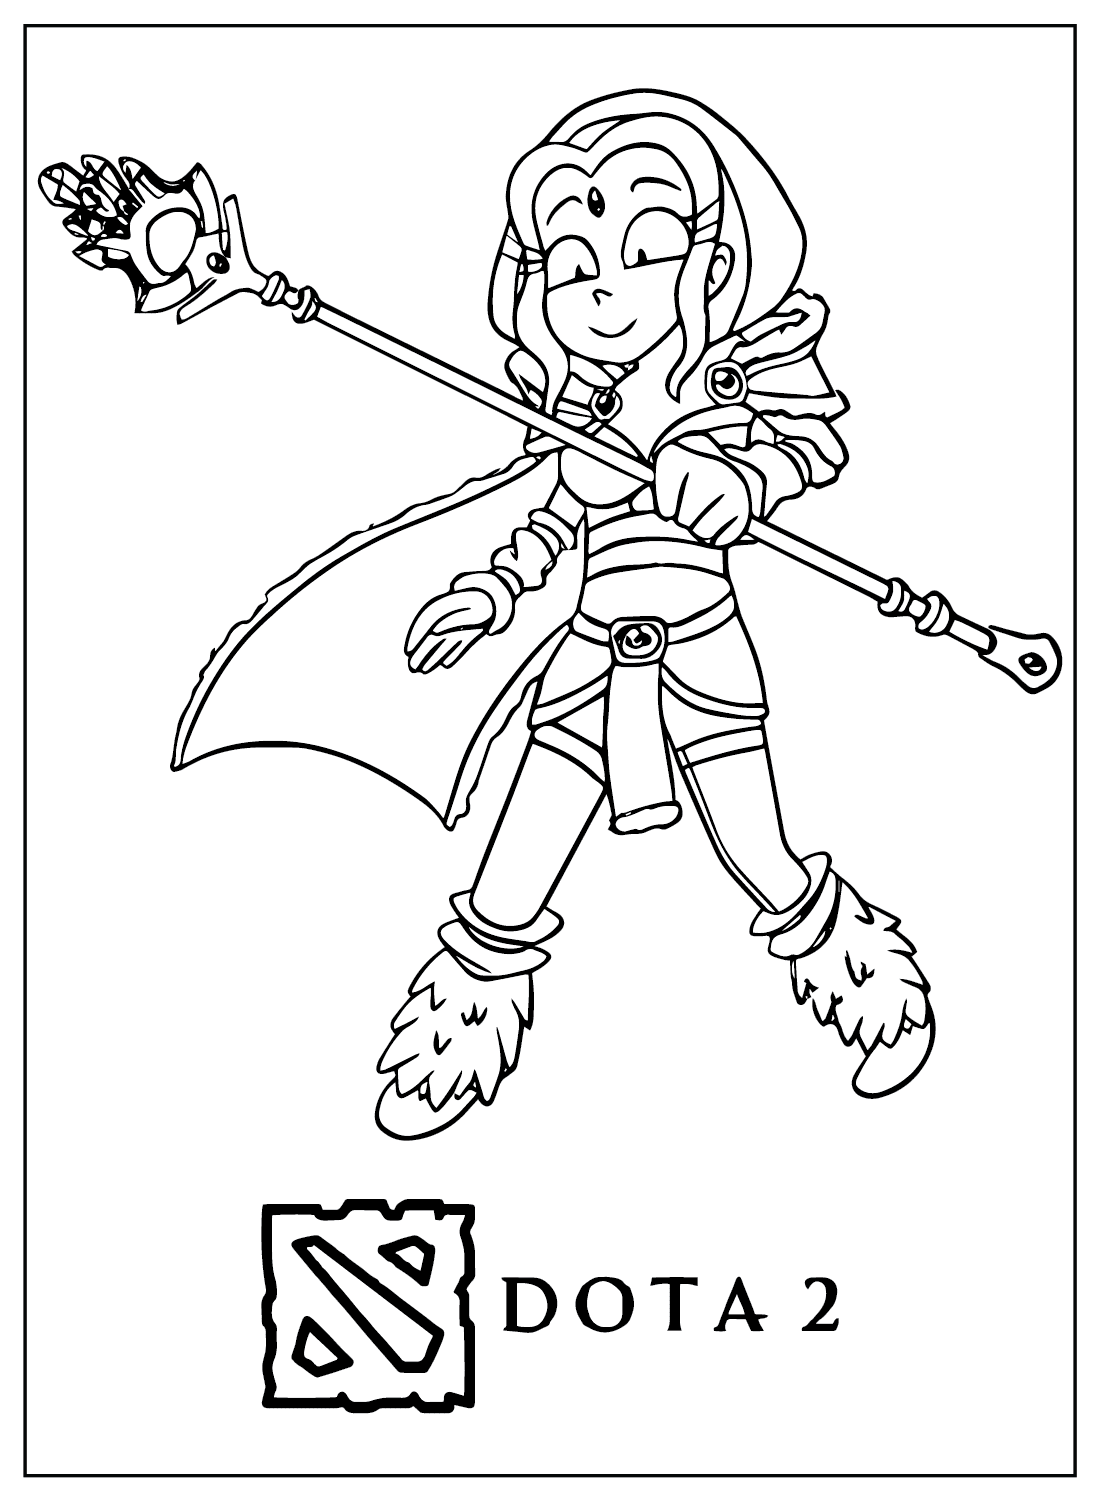 Dota 2 Crystal Maiden Chibi Coloring Page from Dota 2